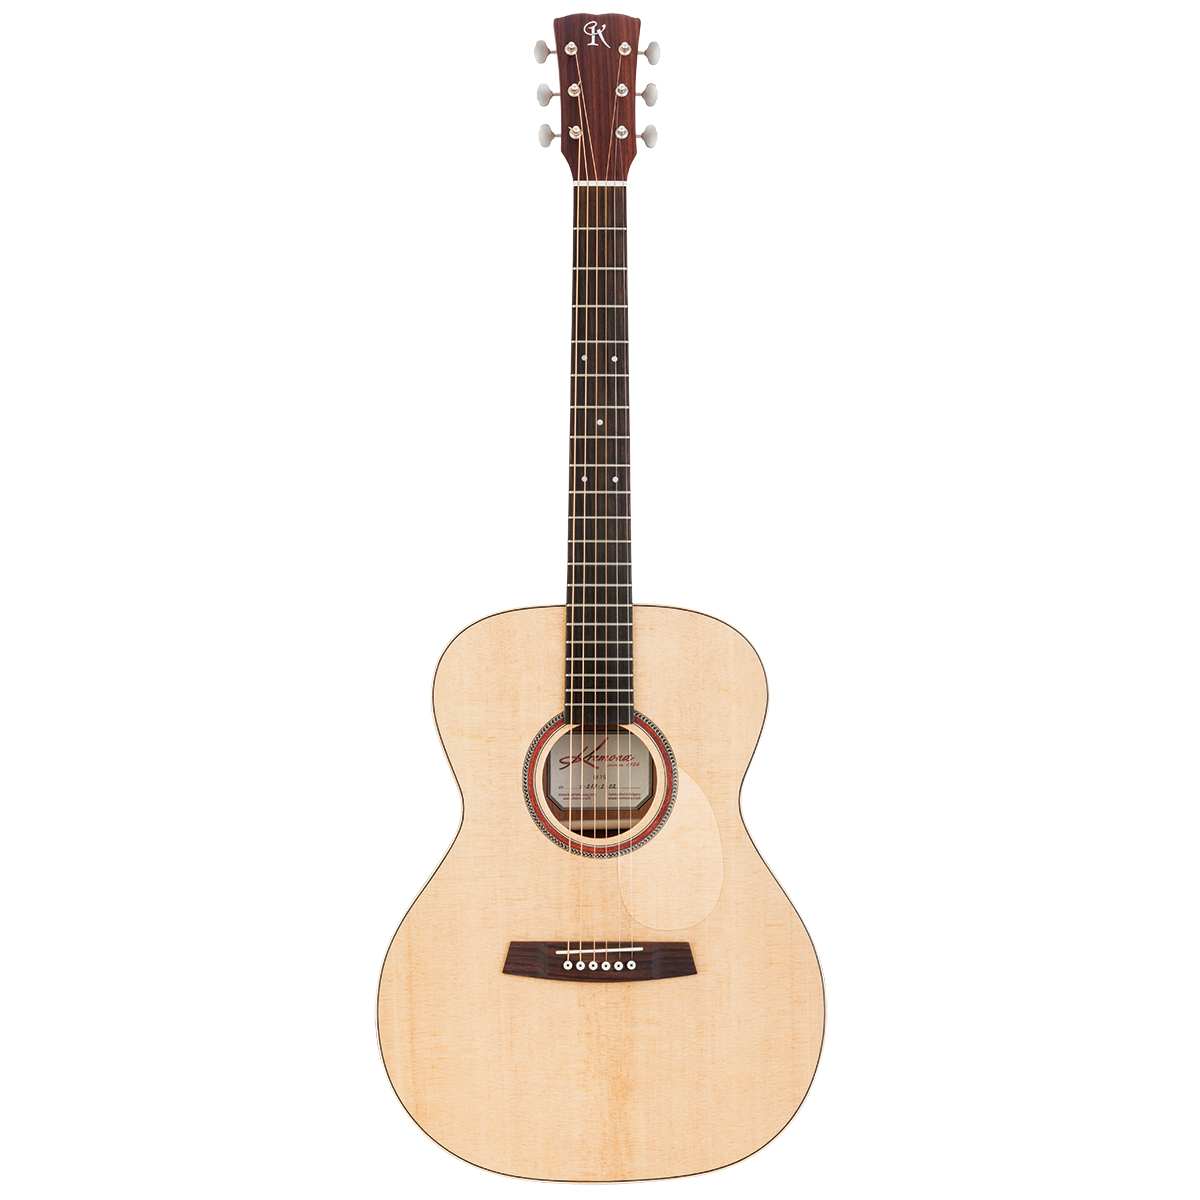 Kremona M15E Steel String Acoustic Solid Spruce Top fitted with LR Baggs preamp and Case